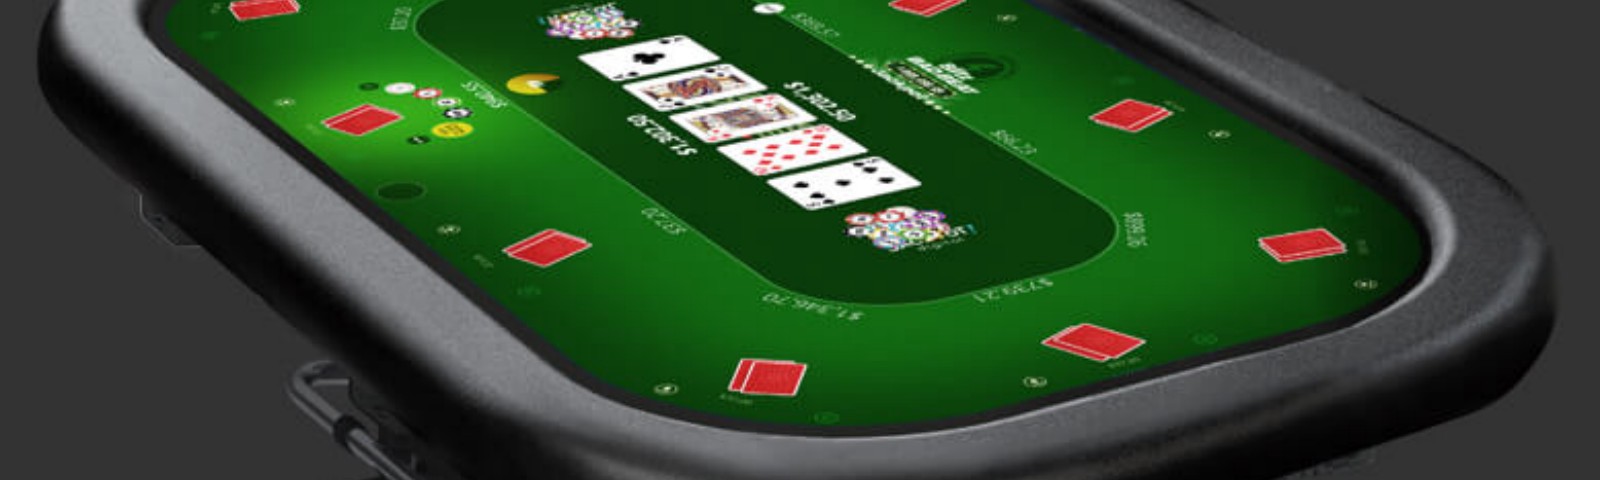 How many hands per hour live poker